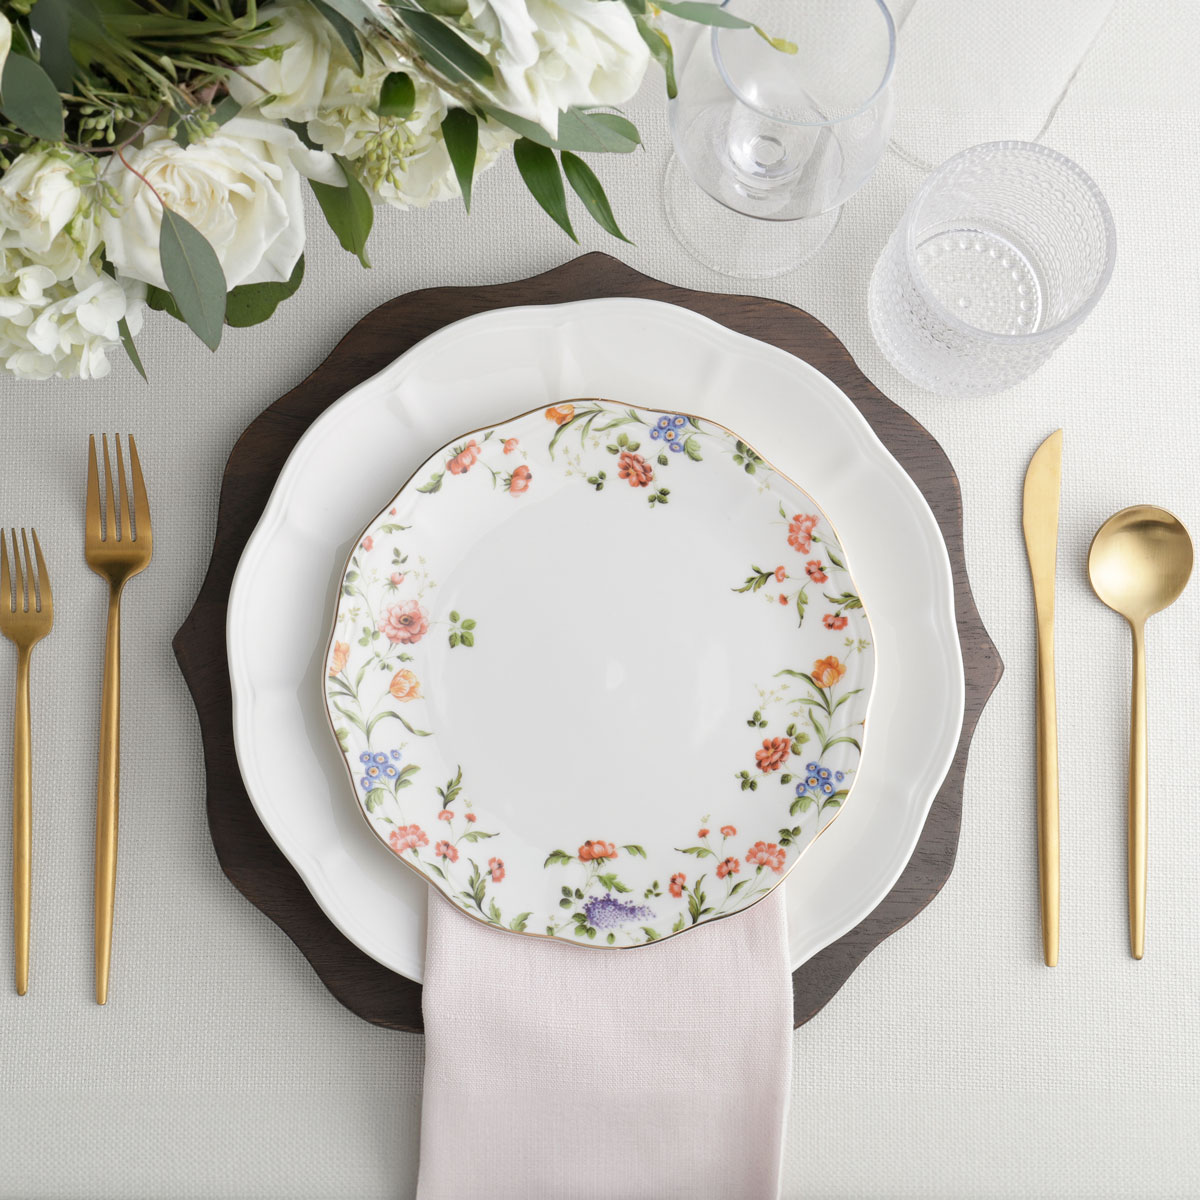 floral china rental table decor place setting